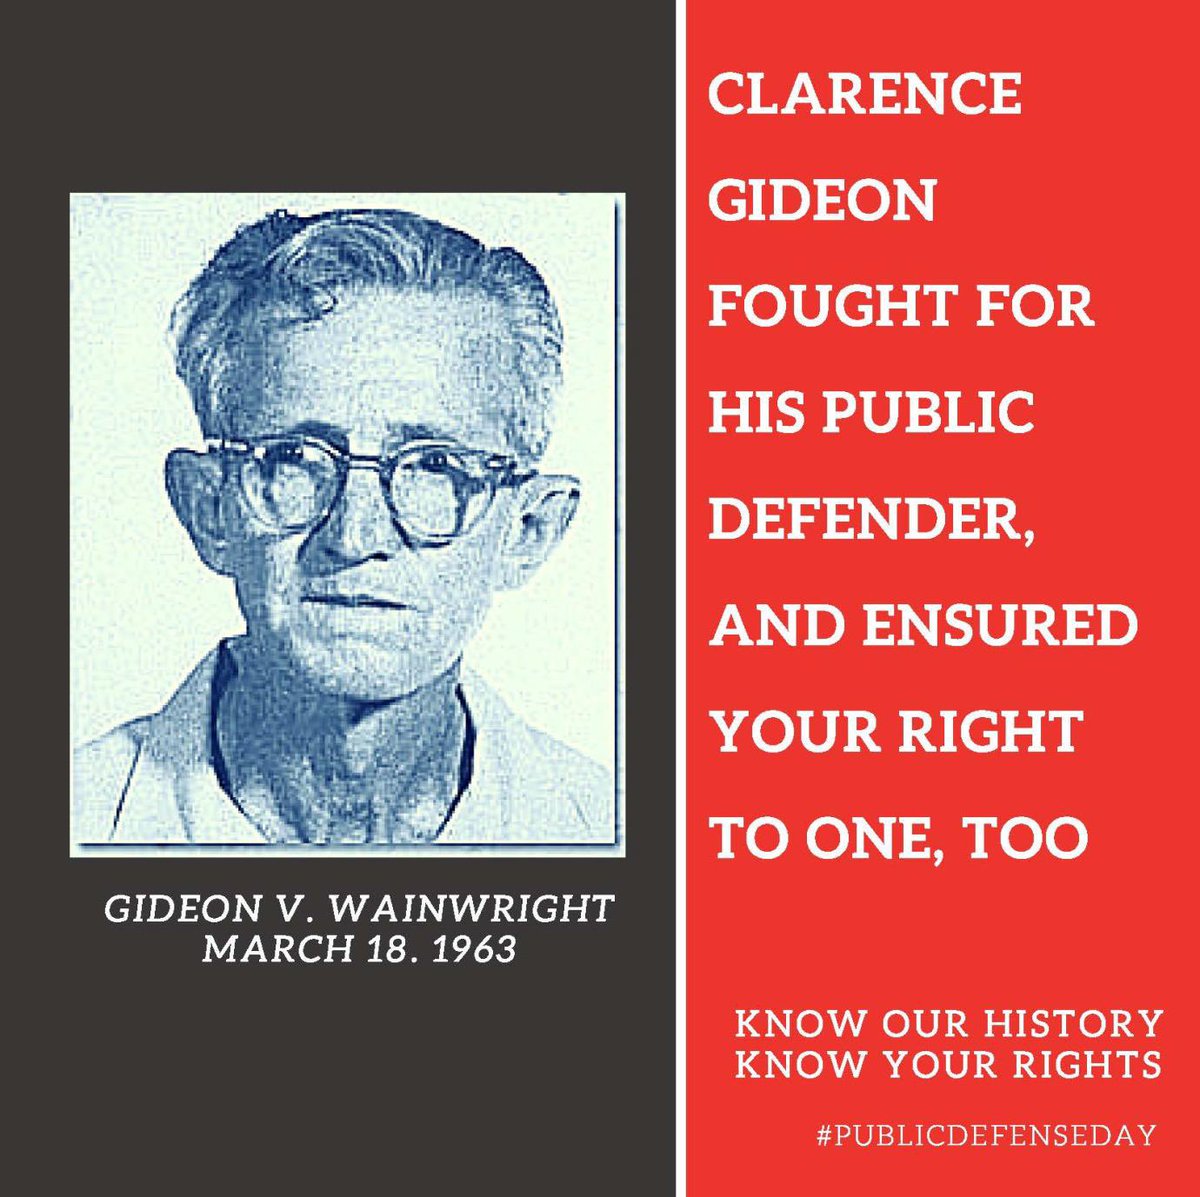 Happy National Public Defense Day! Today, 58 years ago the Supreme Court held that everyone, even those who cannot afford a lawyer, are entitled to representation in Gideon v. Wainwright. 

Grateful for this case and the best profession in the world ♥️

#nationalpublicdefenseday